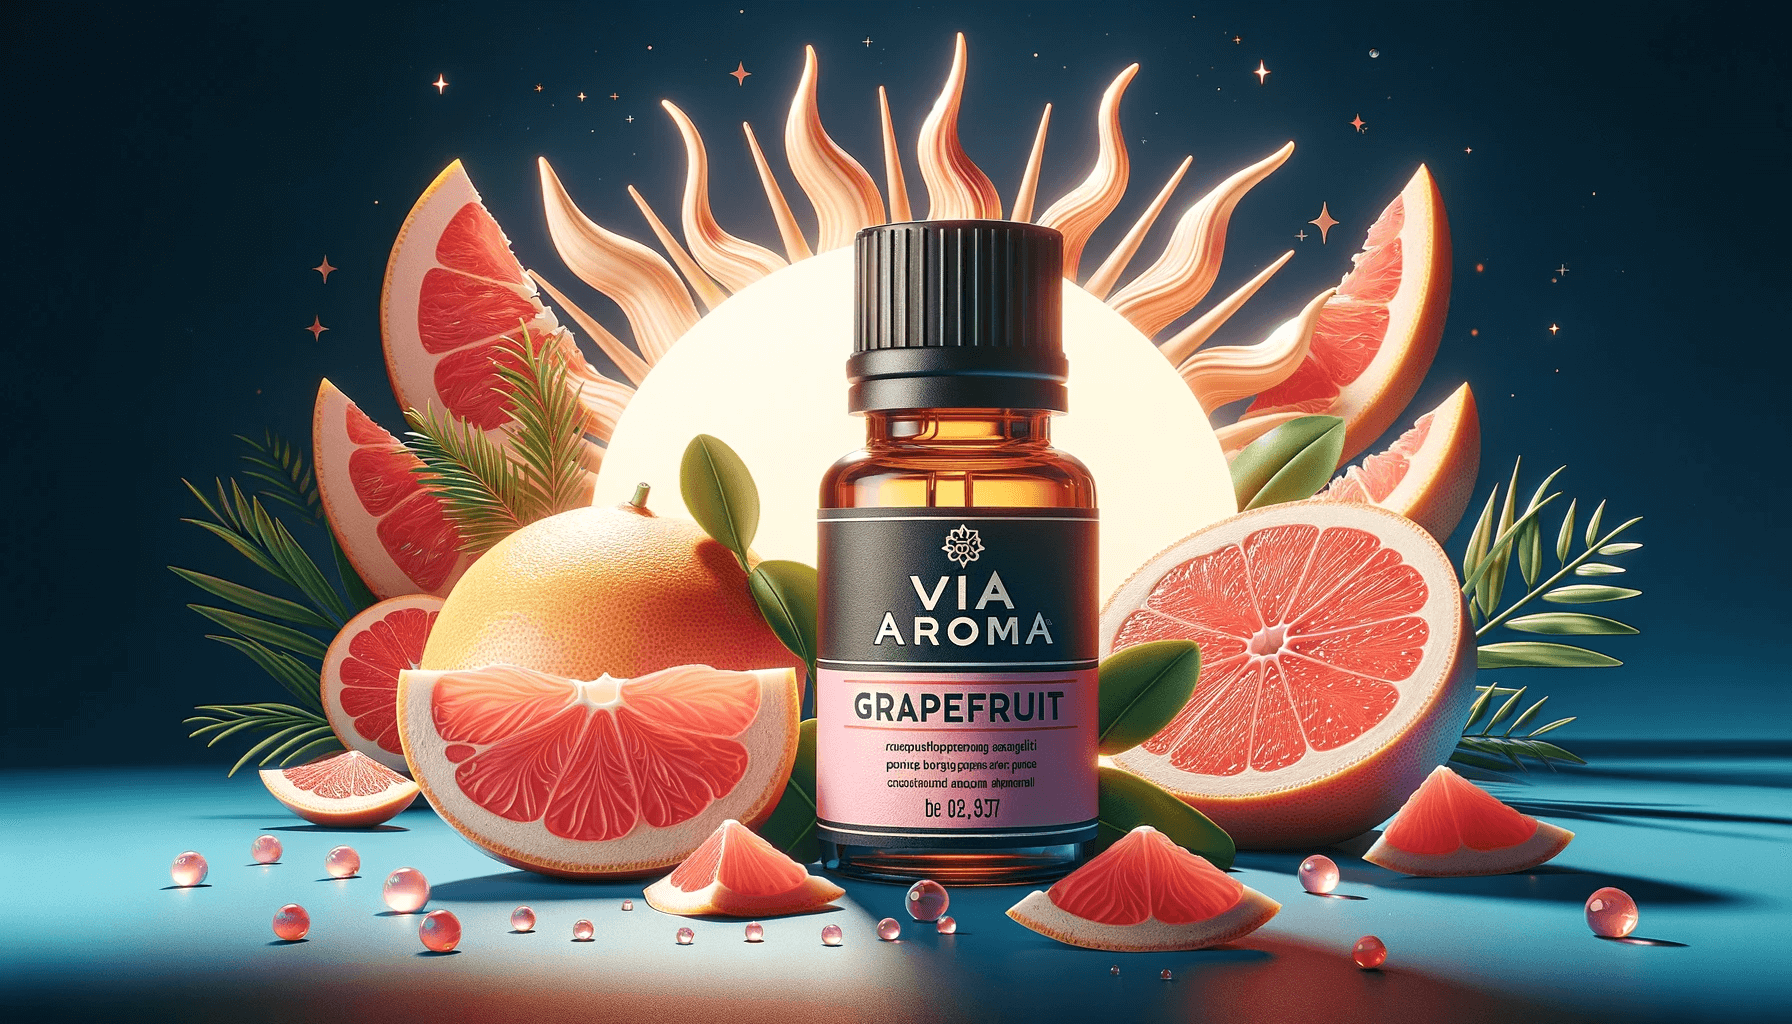 DALL·E 2024 01 23 15.05.53 Enhance the previous composition by removing the Grapefruit label from the Via Aroma essential oil bottle while keeping the brand name Via Aroma